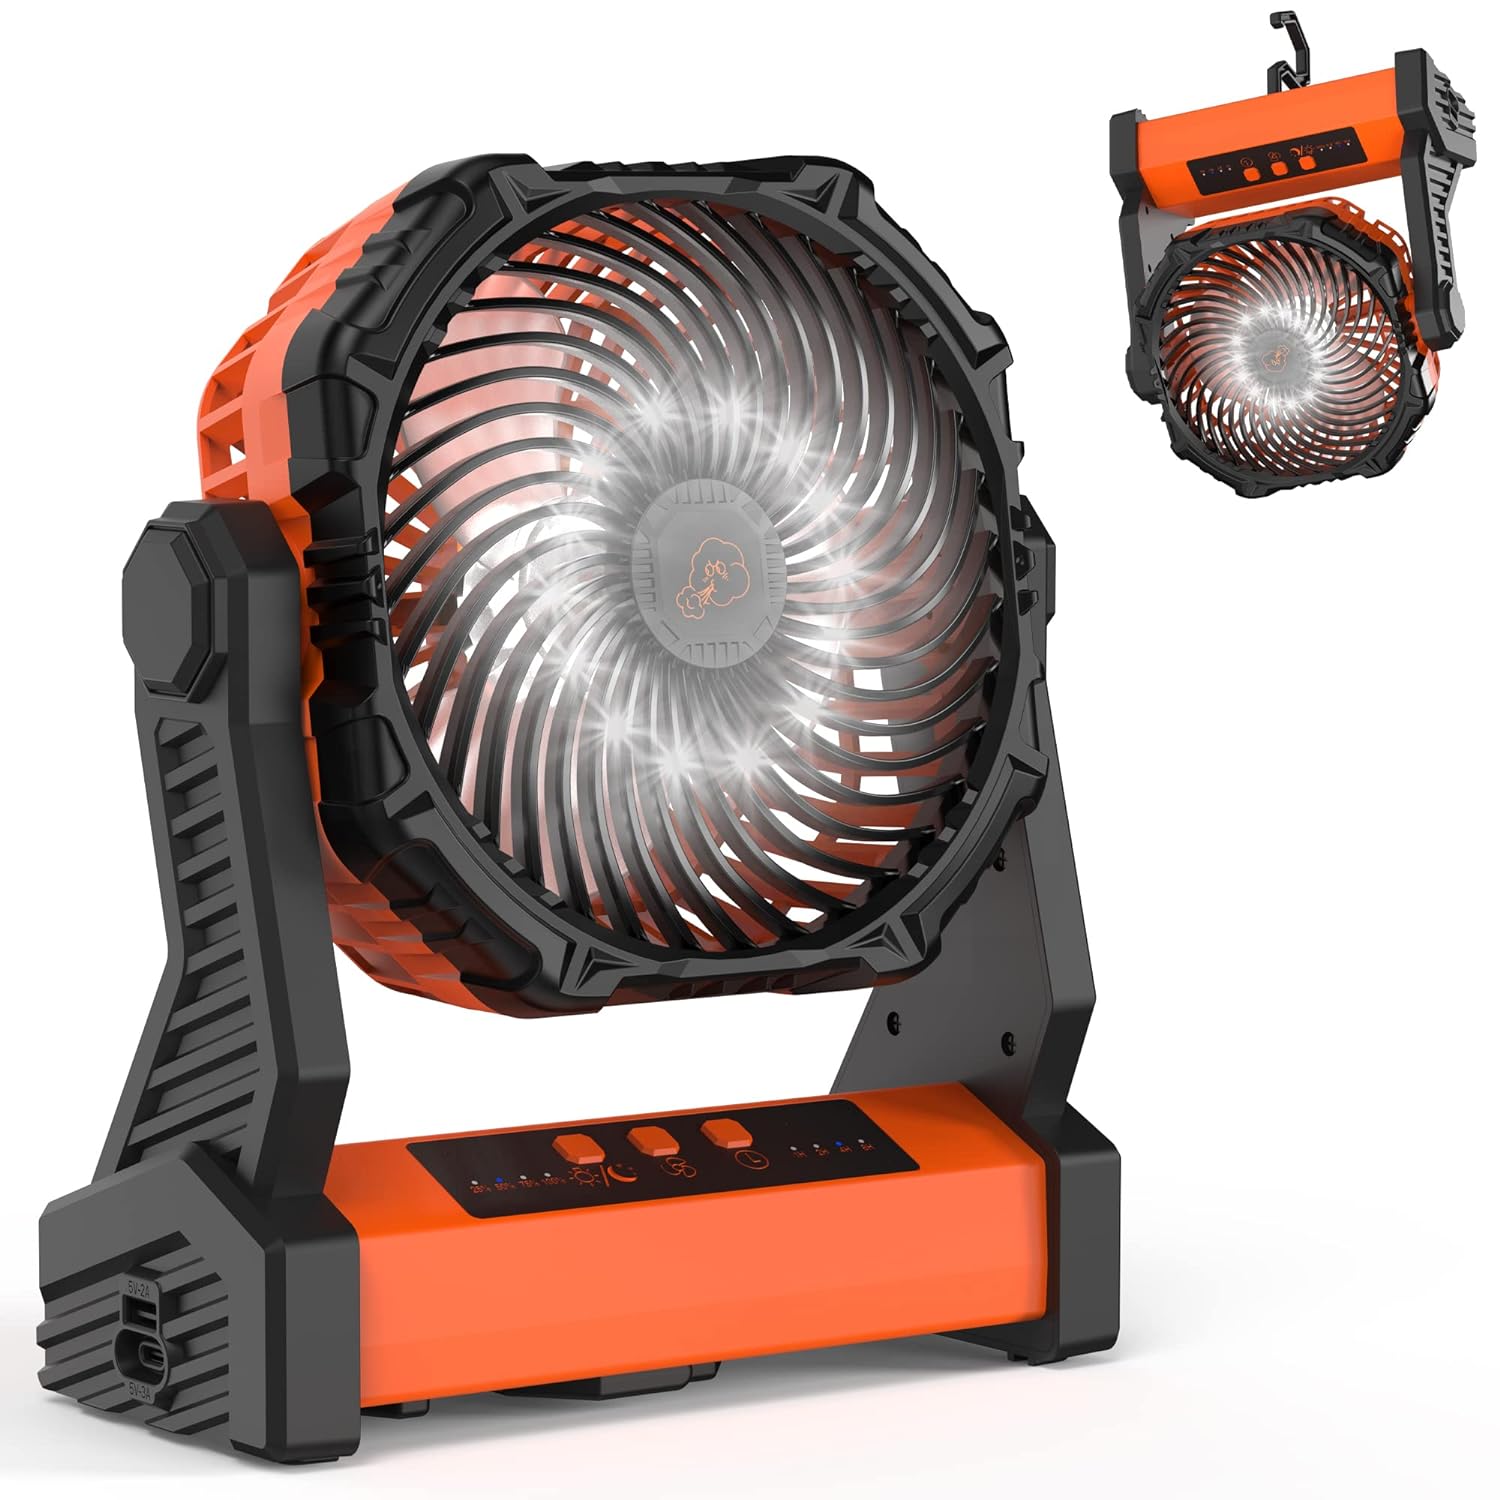 Camping Fan with LED Lantern, 10000mAh Rechargeable Battery Operated Outdoor Tent Fan with Light & Hook, 270° Pivot, 3 Speeds, Personal USB Desk Fan for Camping, Fishing, Power Outage, Hurricane